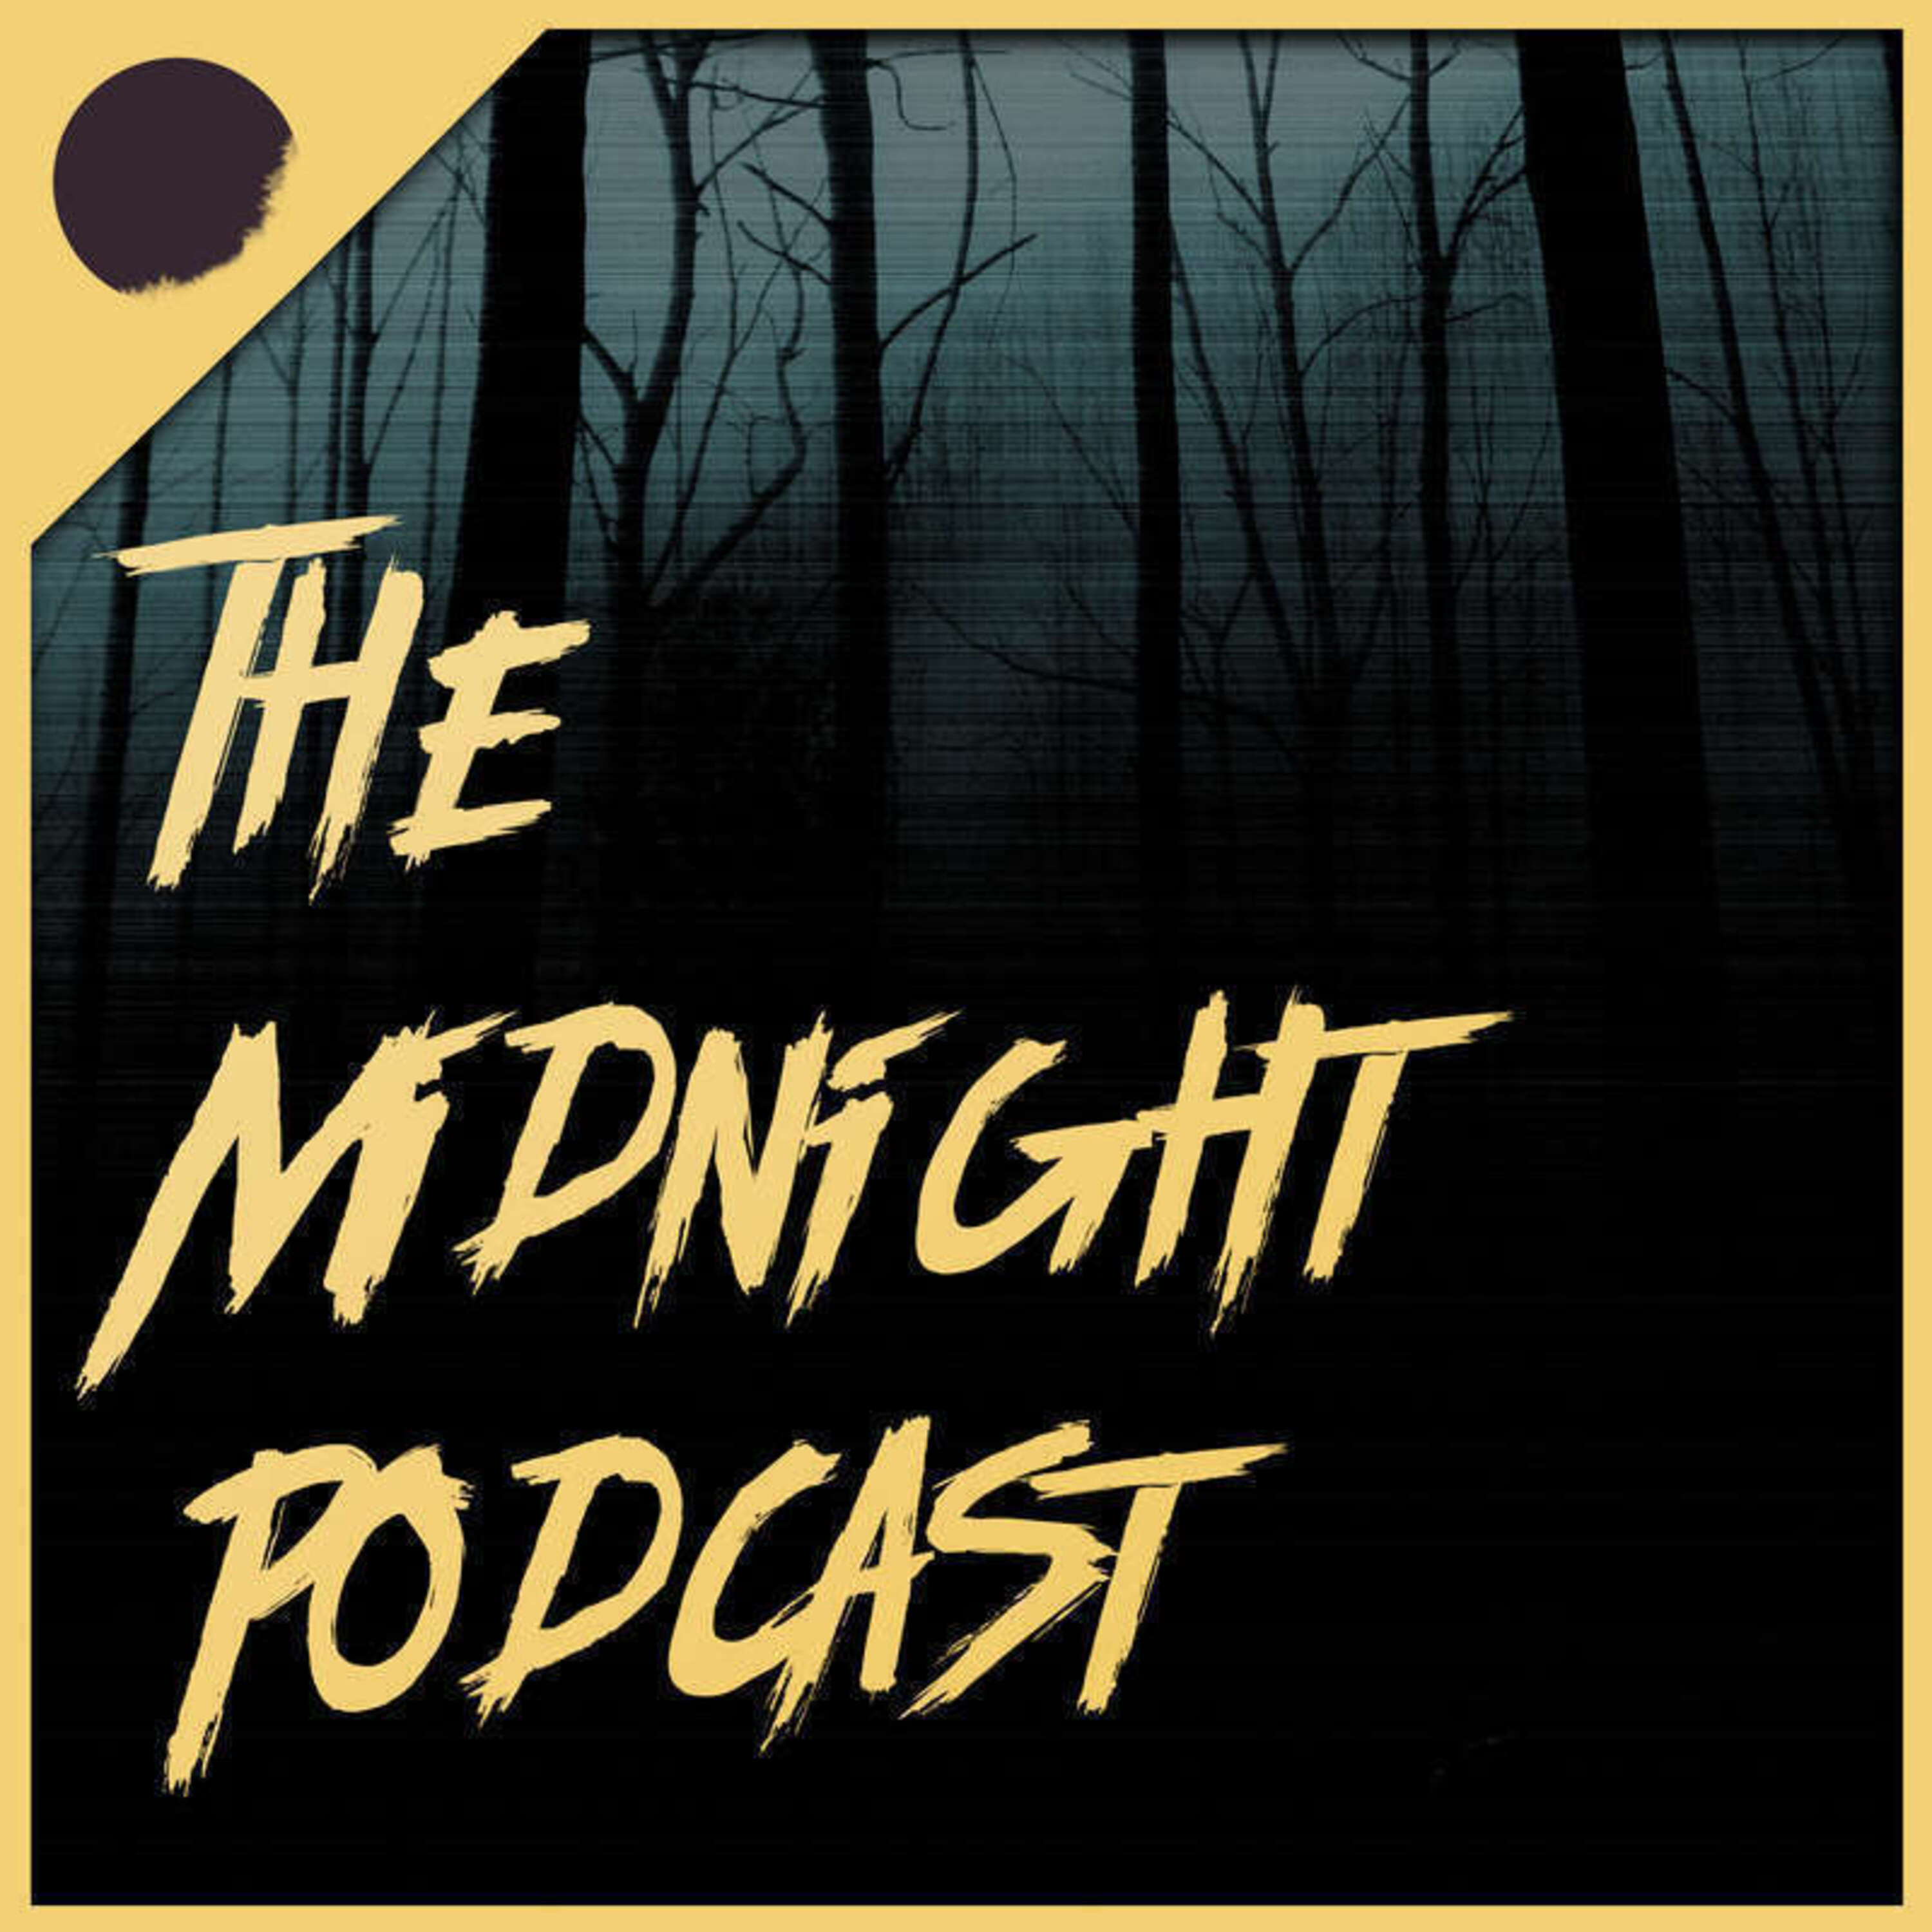 Episode 118 | There's a strange newspaper that's only delivered at midnight | Part 3